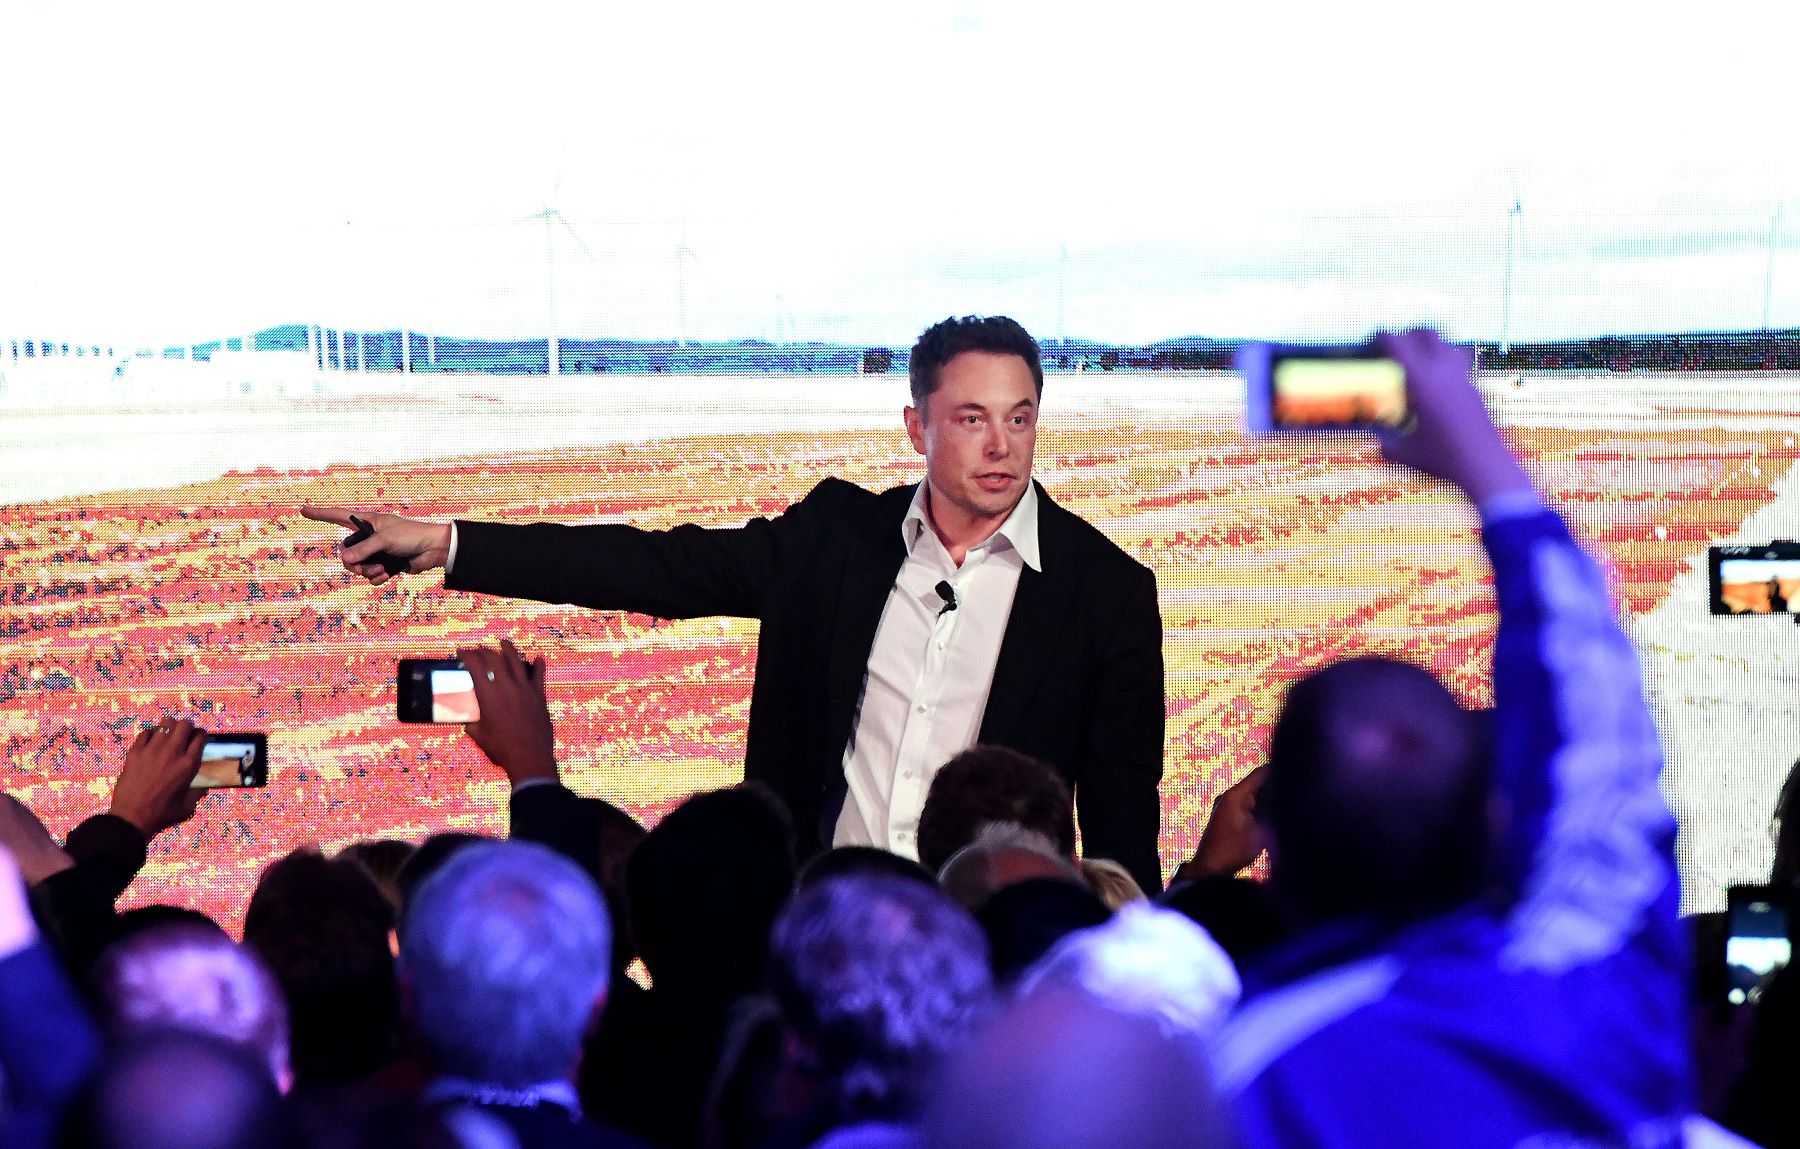 Elon Musk at the lithium battery Tesla Powerpack Launch Event at Hornsdale Wind Farm in Adelaide, Australia